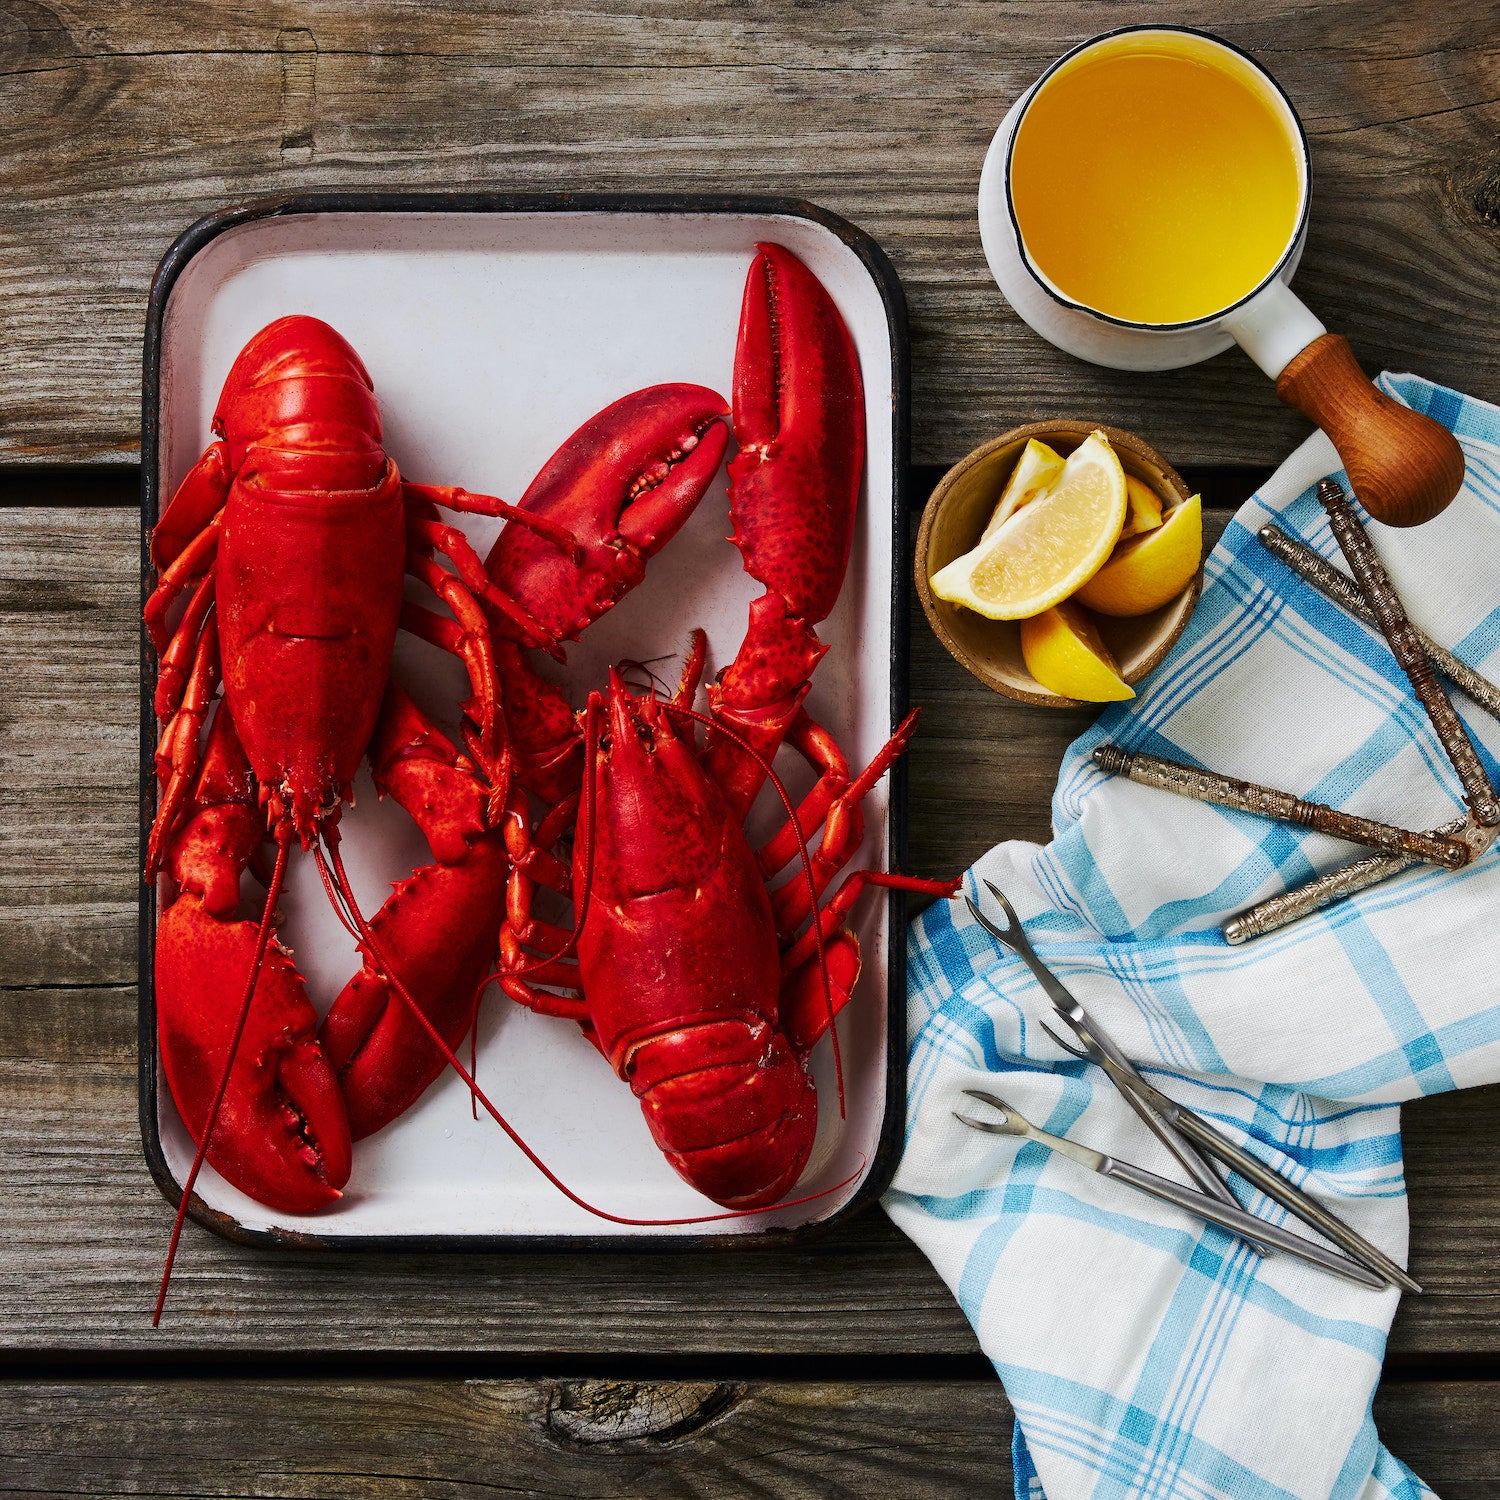 This photograph shows the two lobsters on a tray freshly steamed alongside a small pot of melted butter, Lemon wedges, claw crackers and picks to remove all of the delicious Maine lobster meat